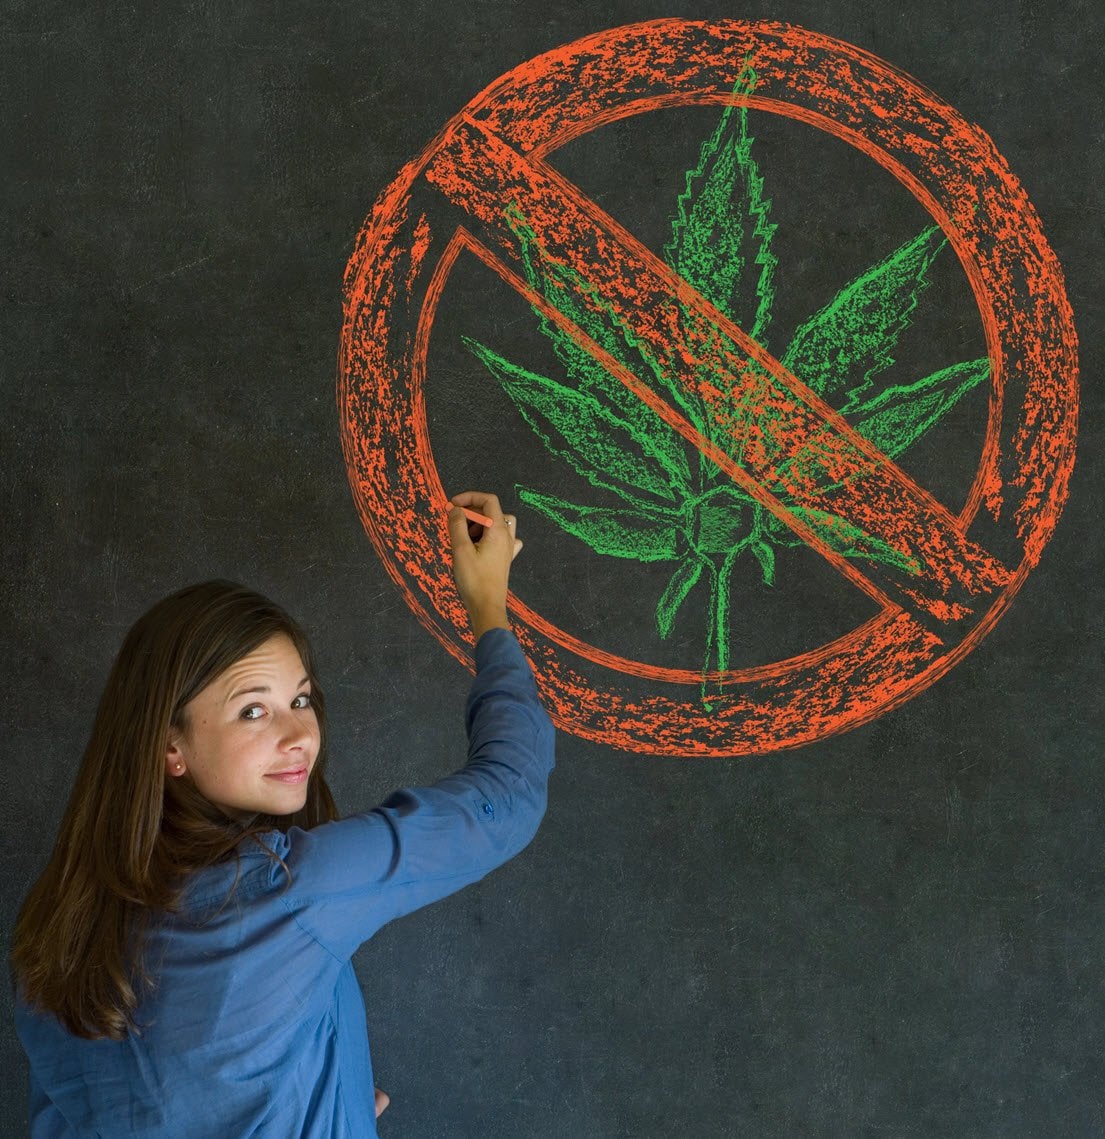 8th Grade Sober - Legalizing Weed Does Not Lead to an Increase in Middle School Cannabis Use Says New Study